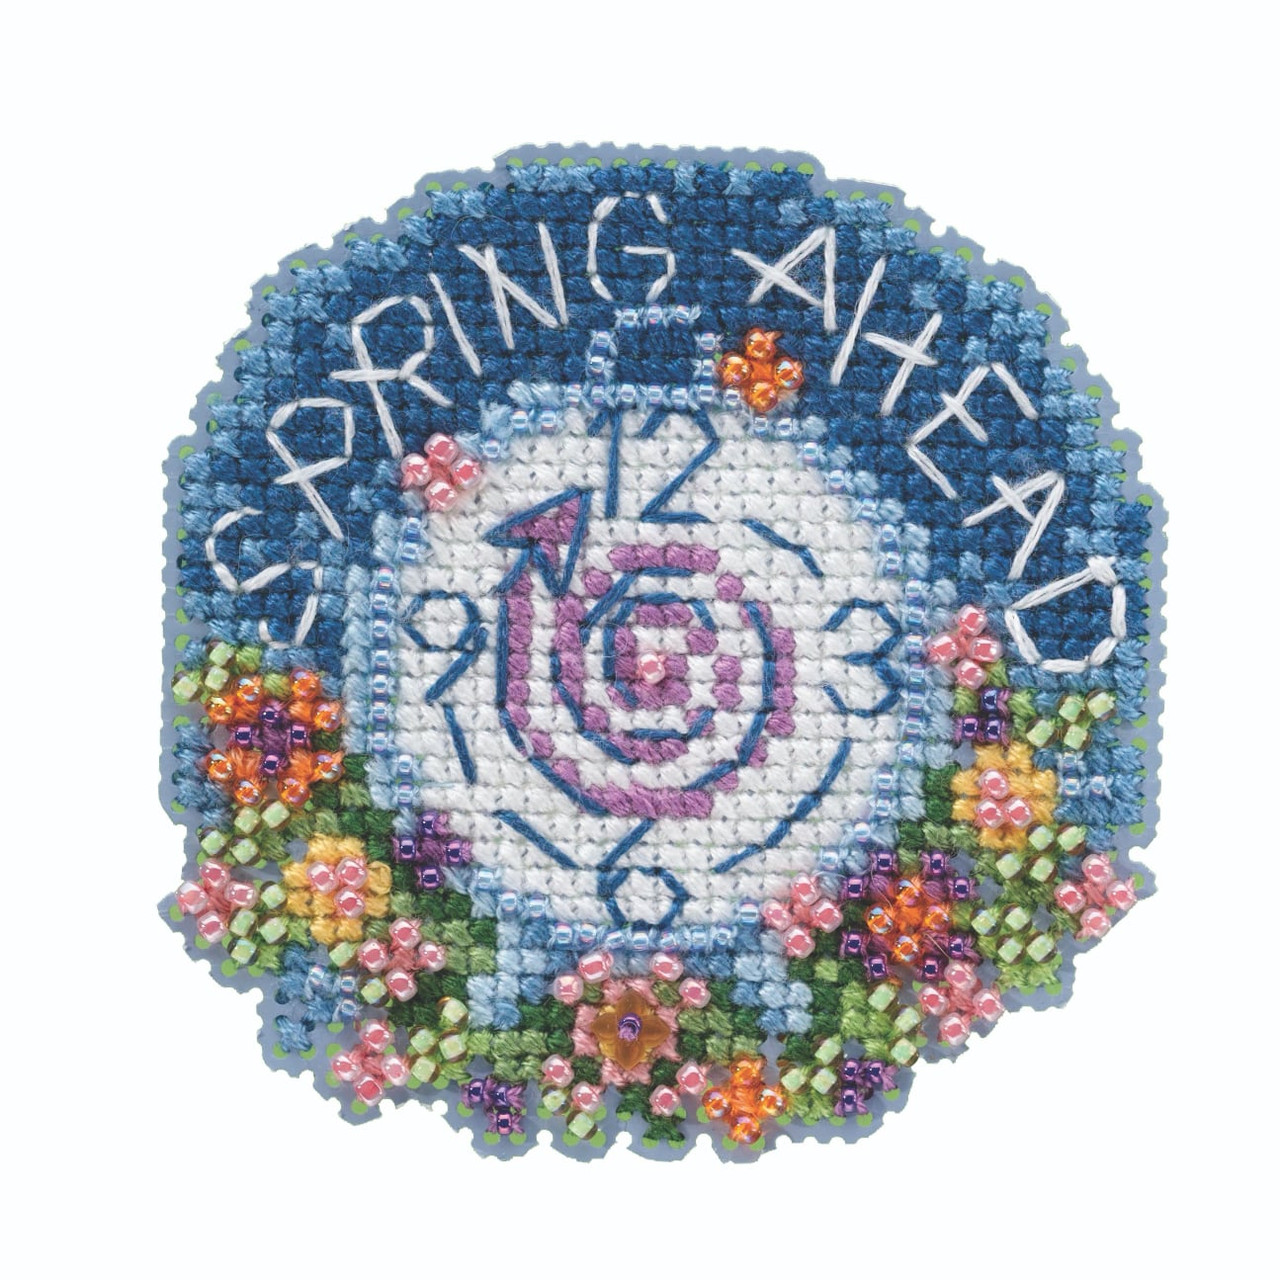 Spring Ahead Beaded Cross Stitch Kit Mill Hill 2020 Spring Bouquet MH182013